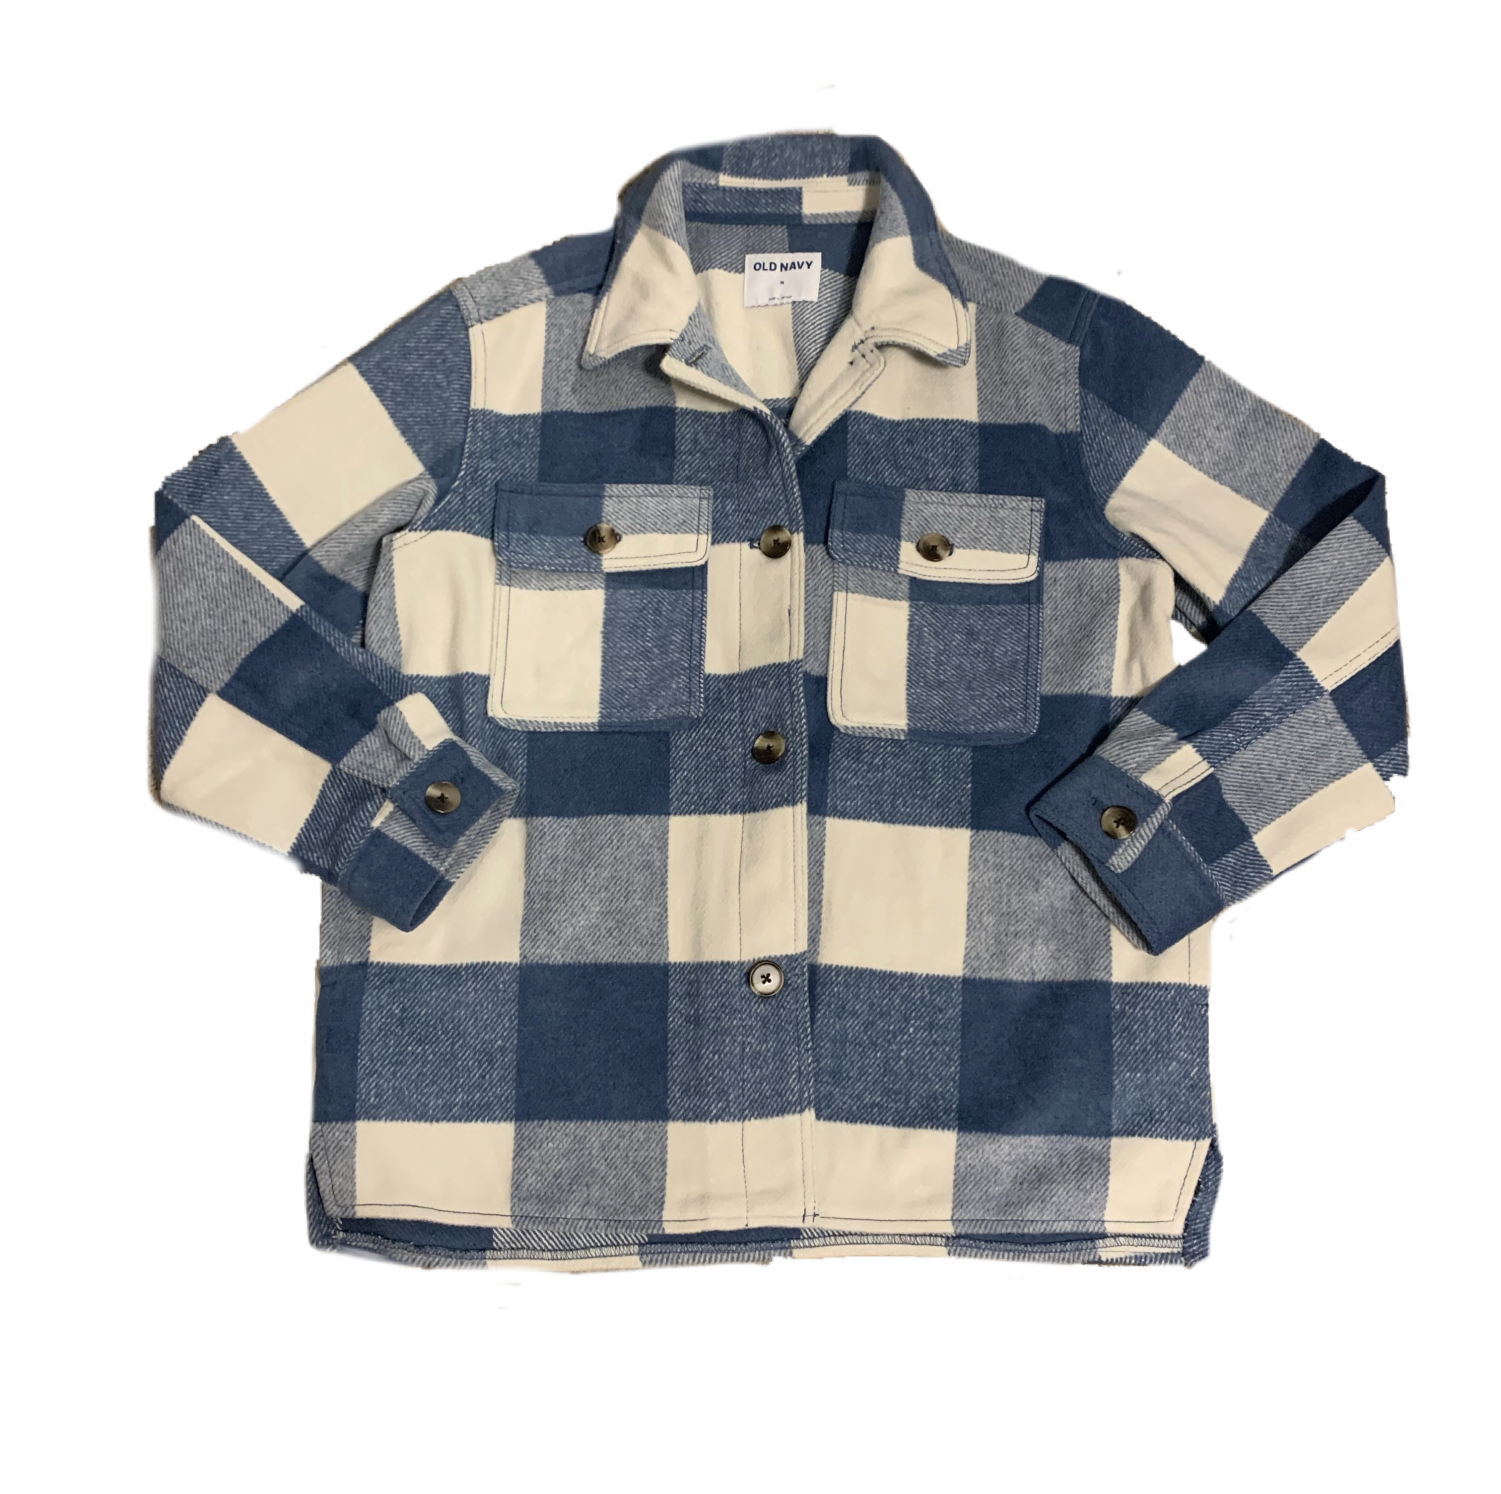 These flannel jackets have have become a huge upcoming trend that many teens are wearing. Yet, no one can decide on what is the most appropriate name to call it. 